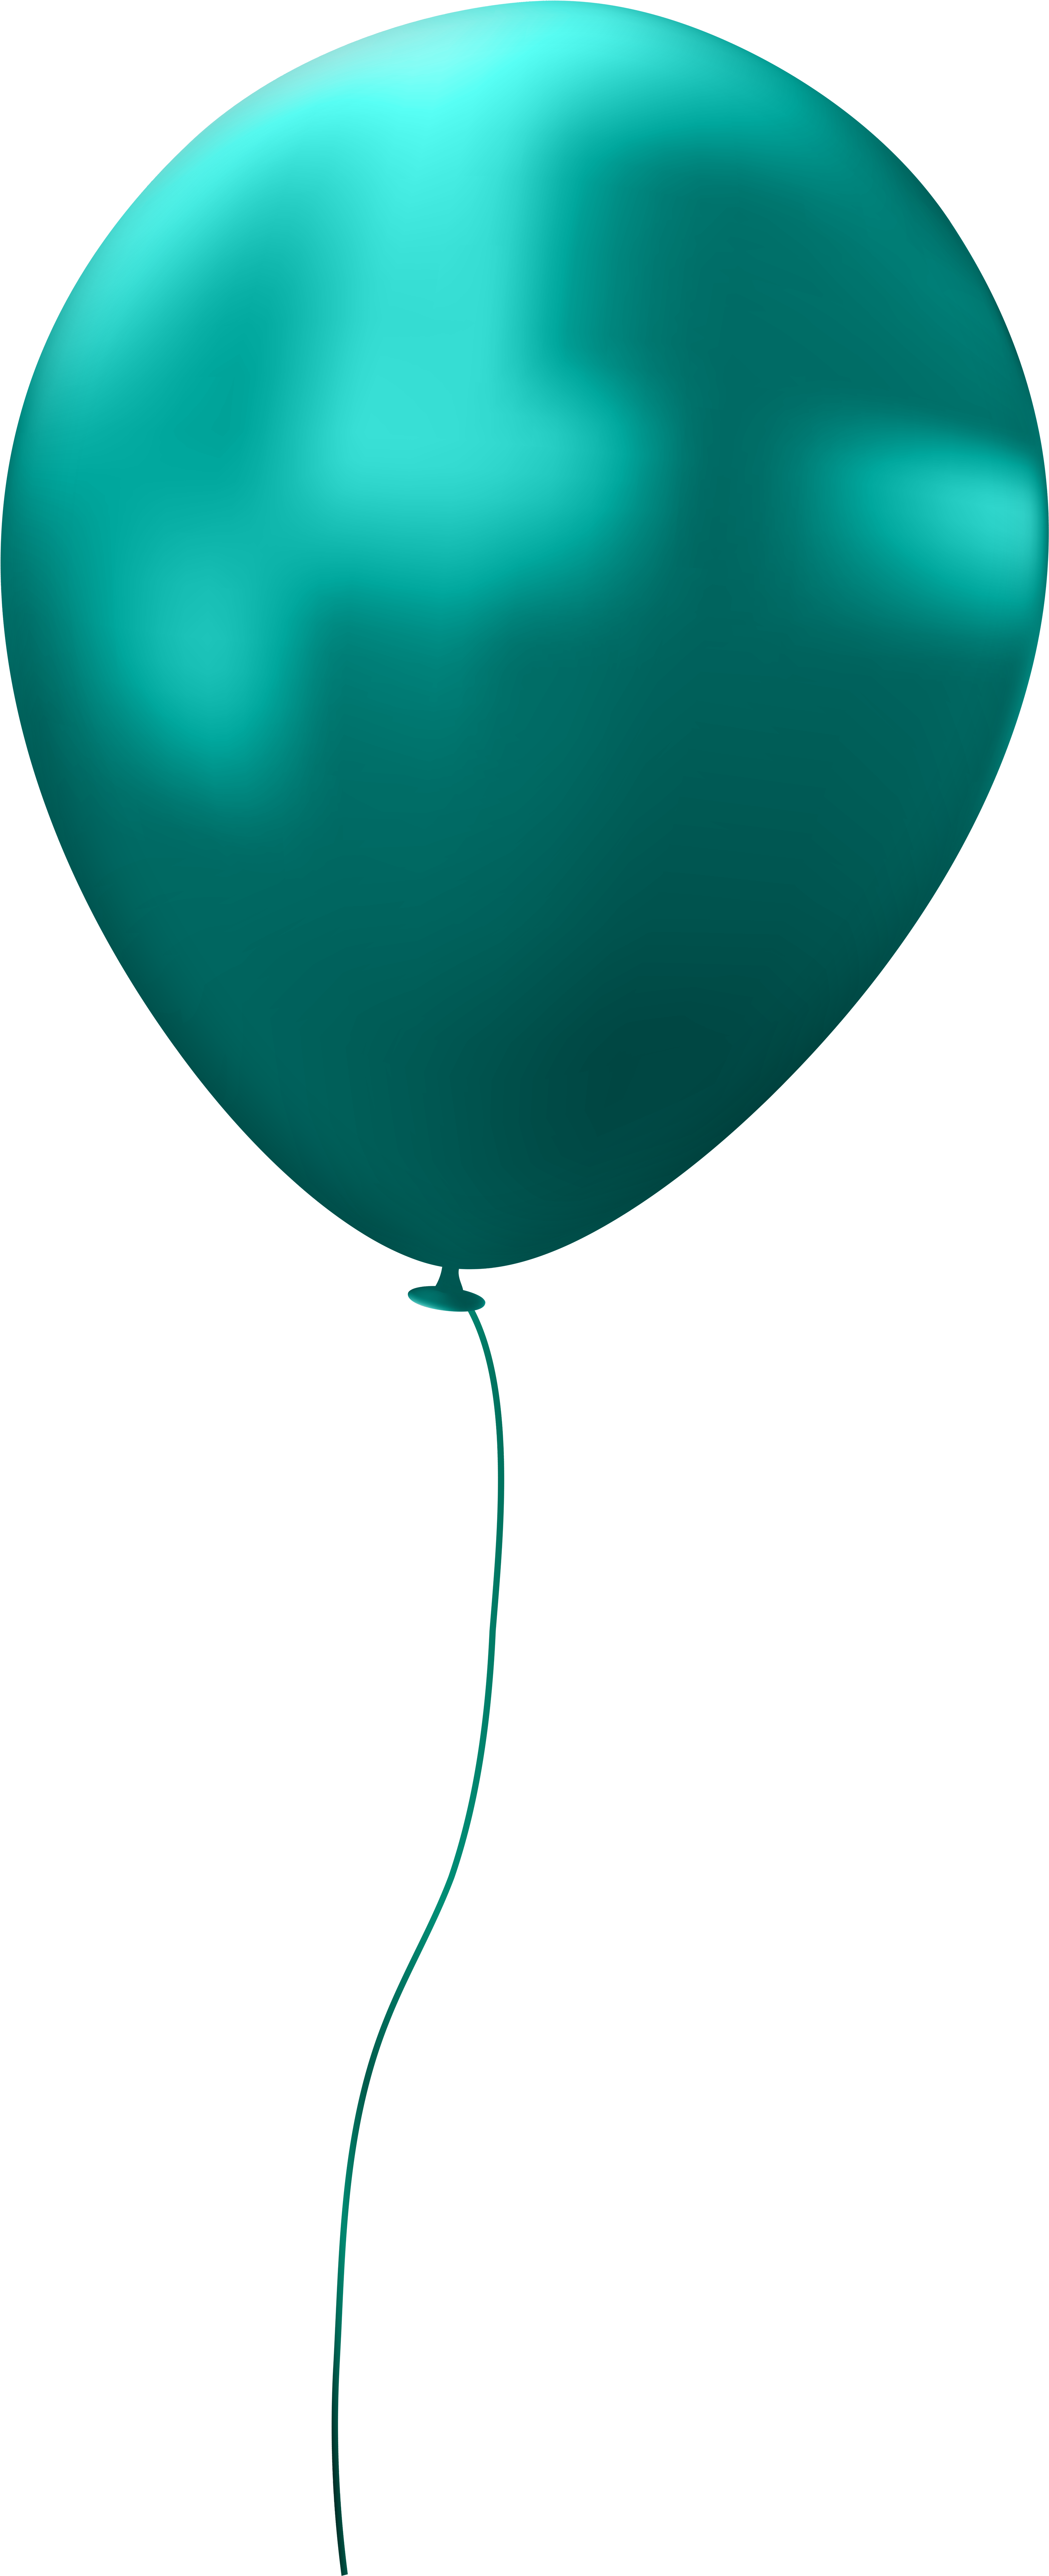 Single Balloon Png Clip Art Image - Transparent Background Balloon Png (3333x8000)